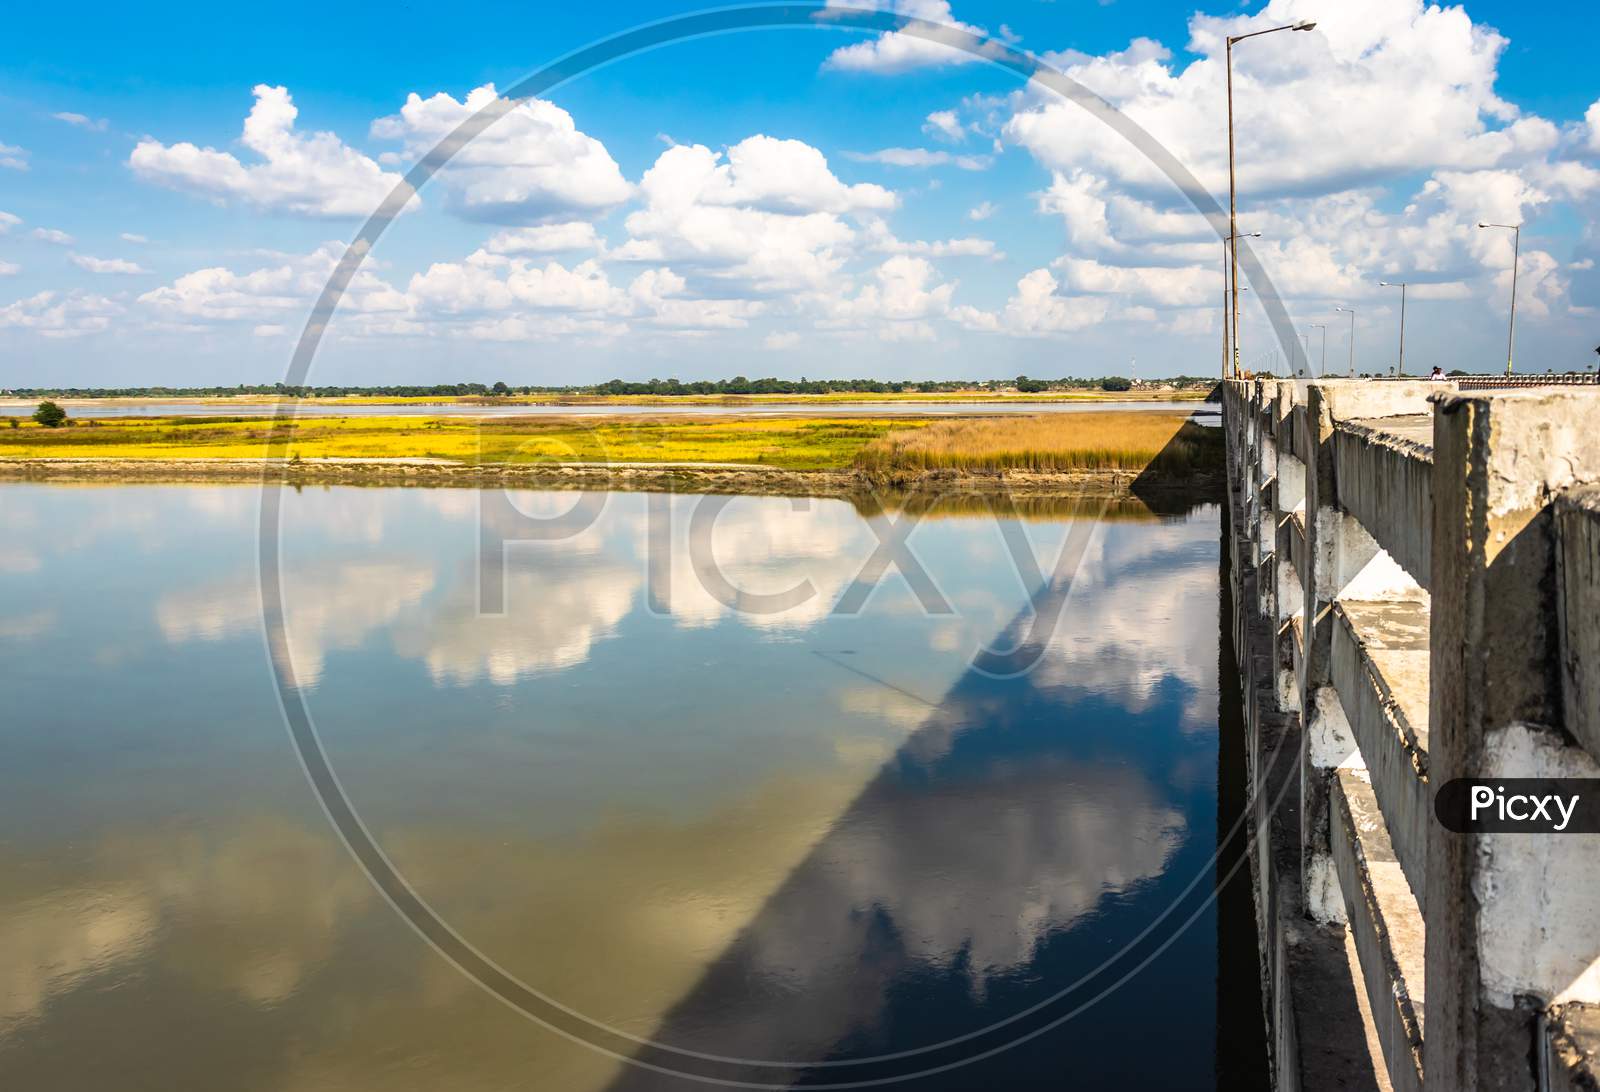 Clear Blue Sky With Many Small Cloud Patch And River Water Reflection By The Side Of River Bridge